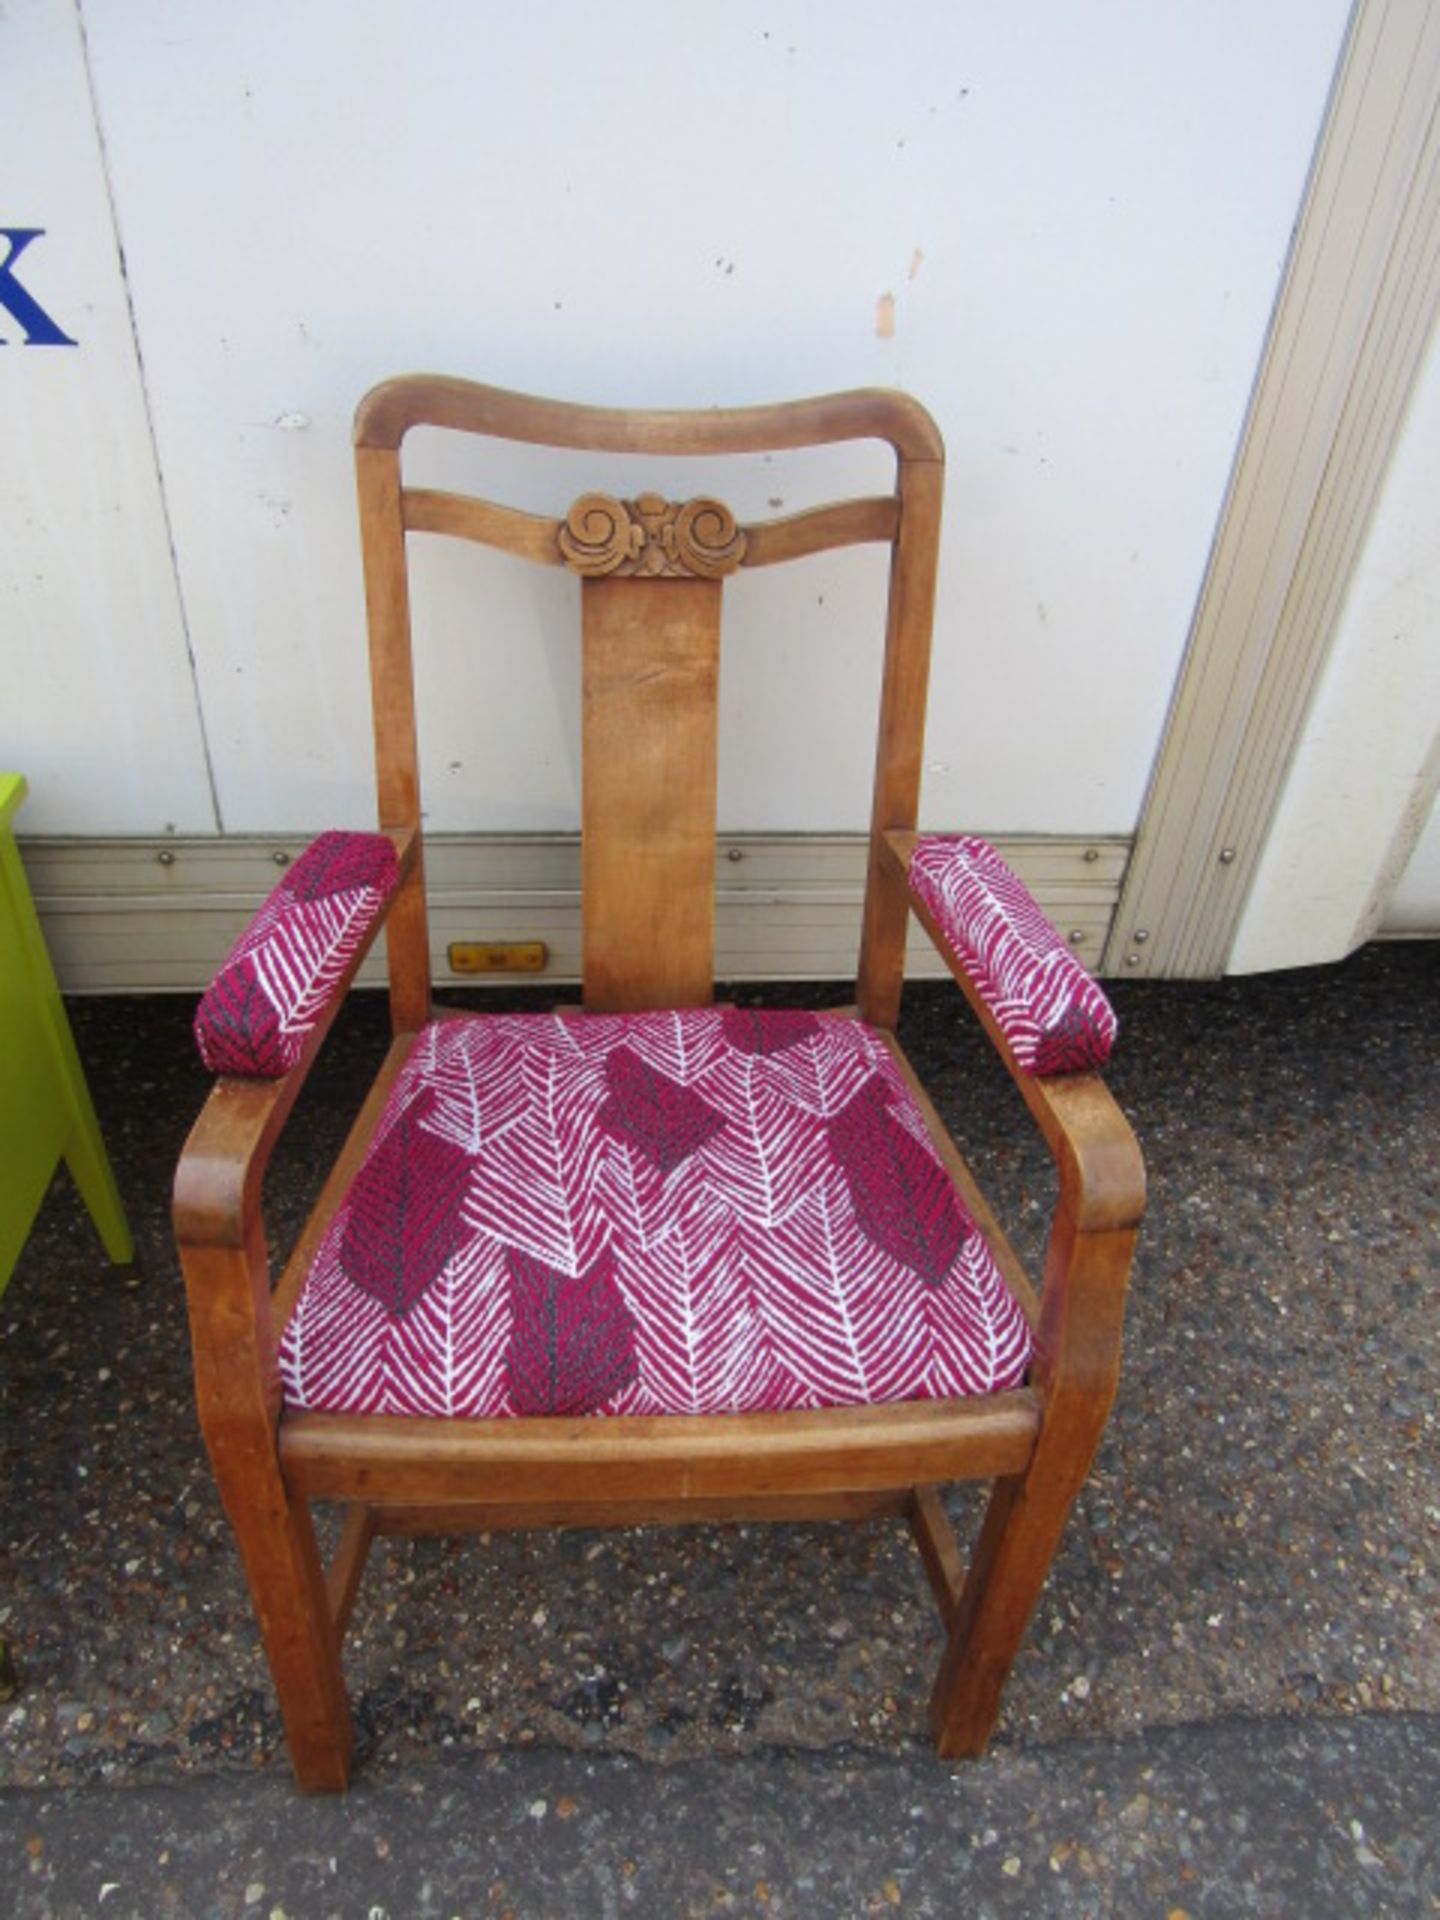 Upholstered open arm chair